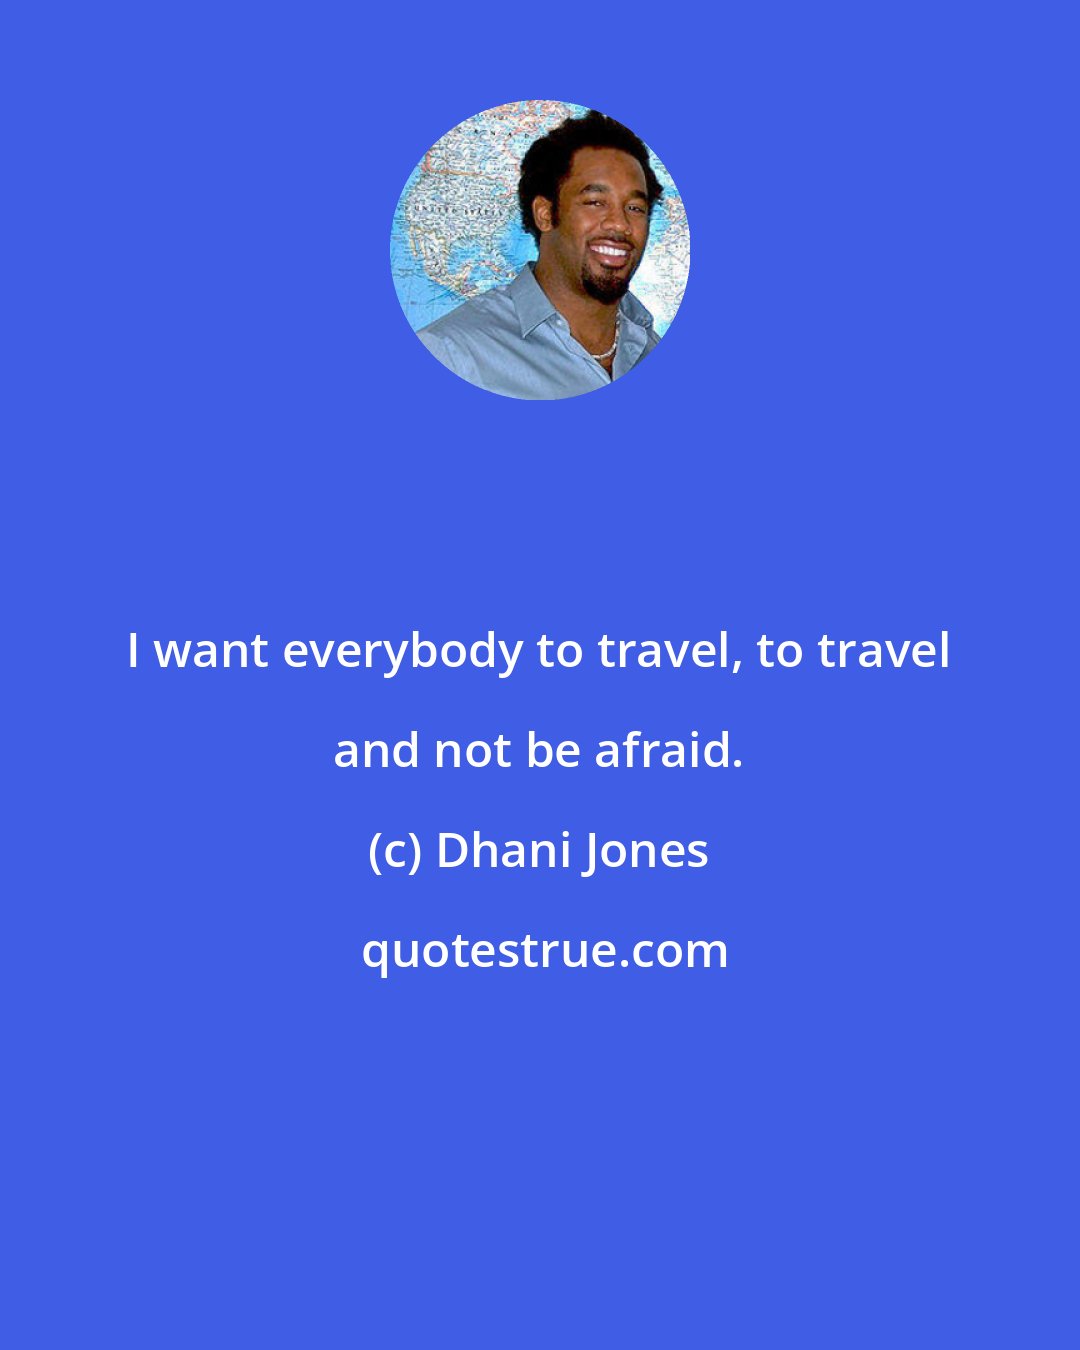 Dhani Jones: I want everybody to travel, to travel and not be afraid.